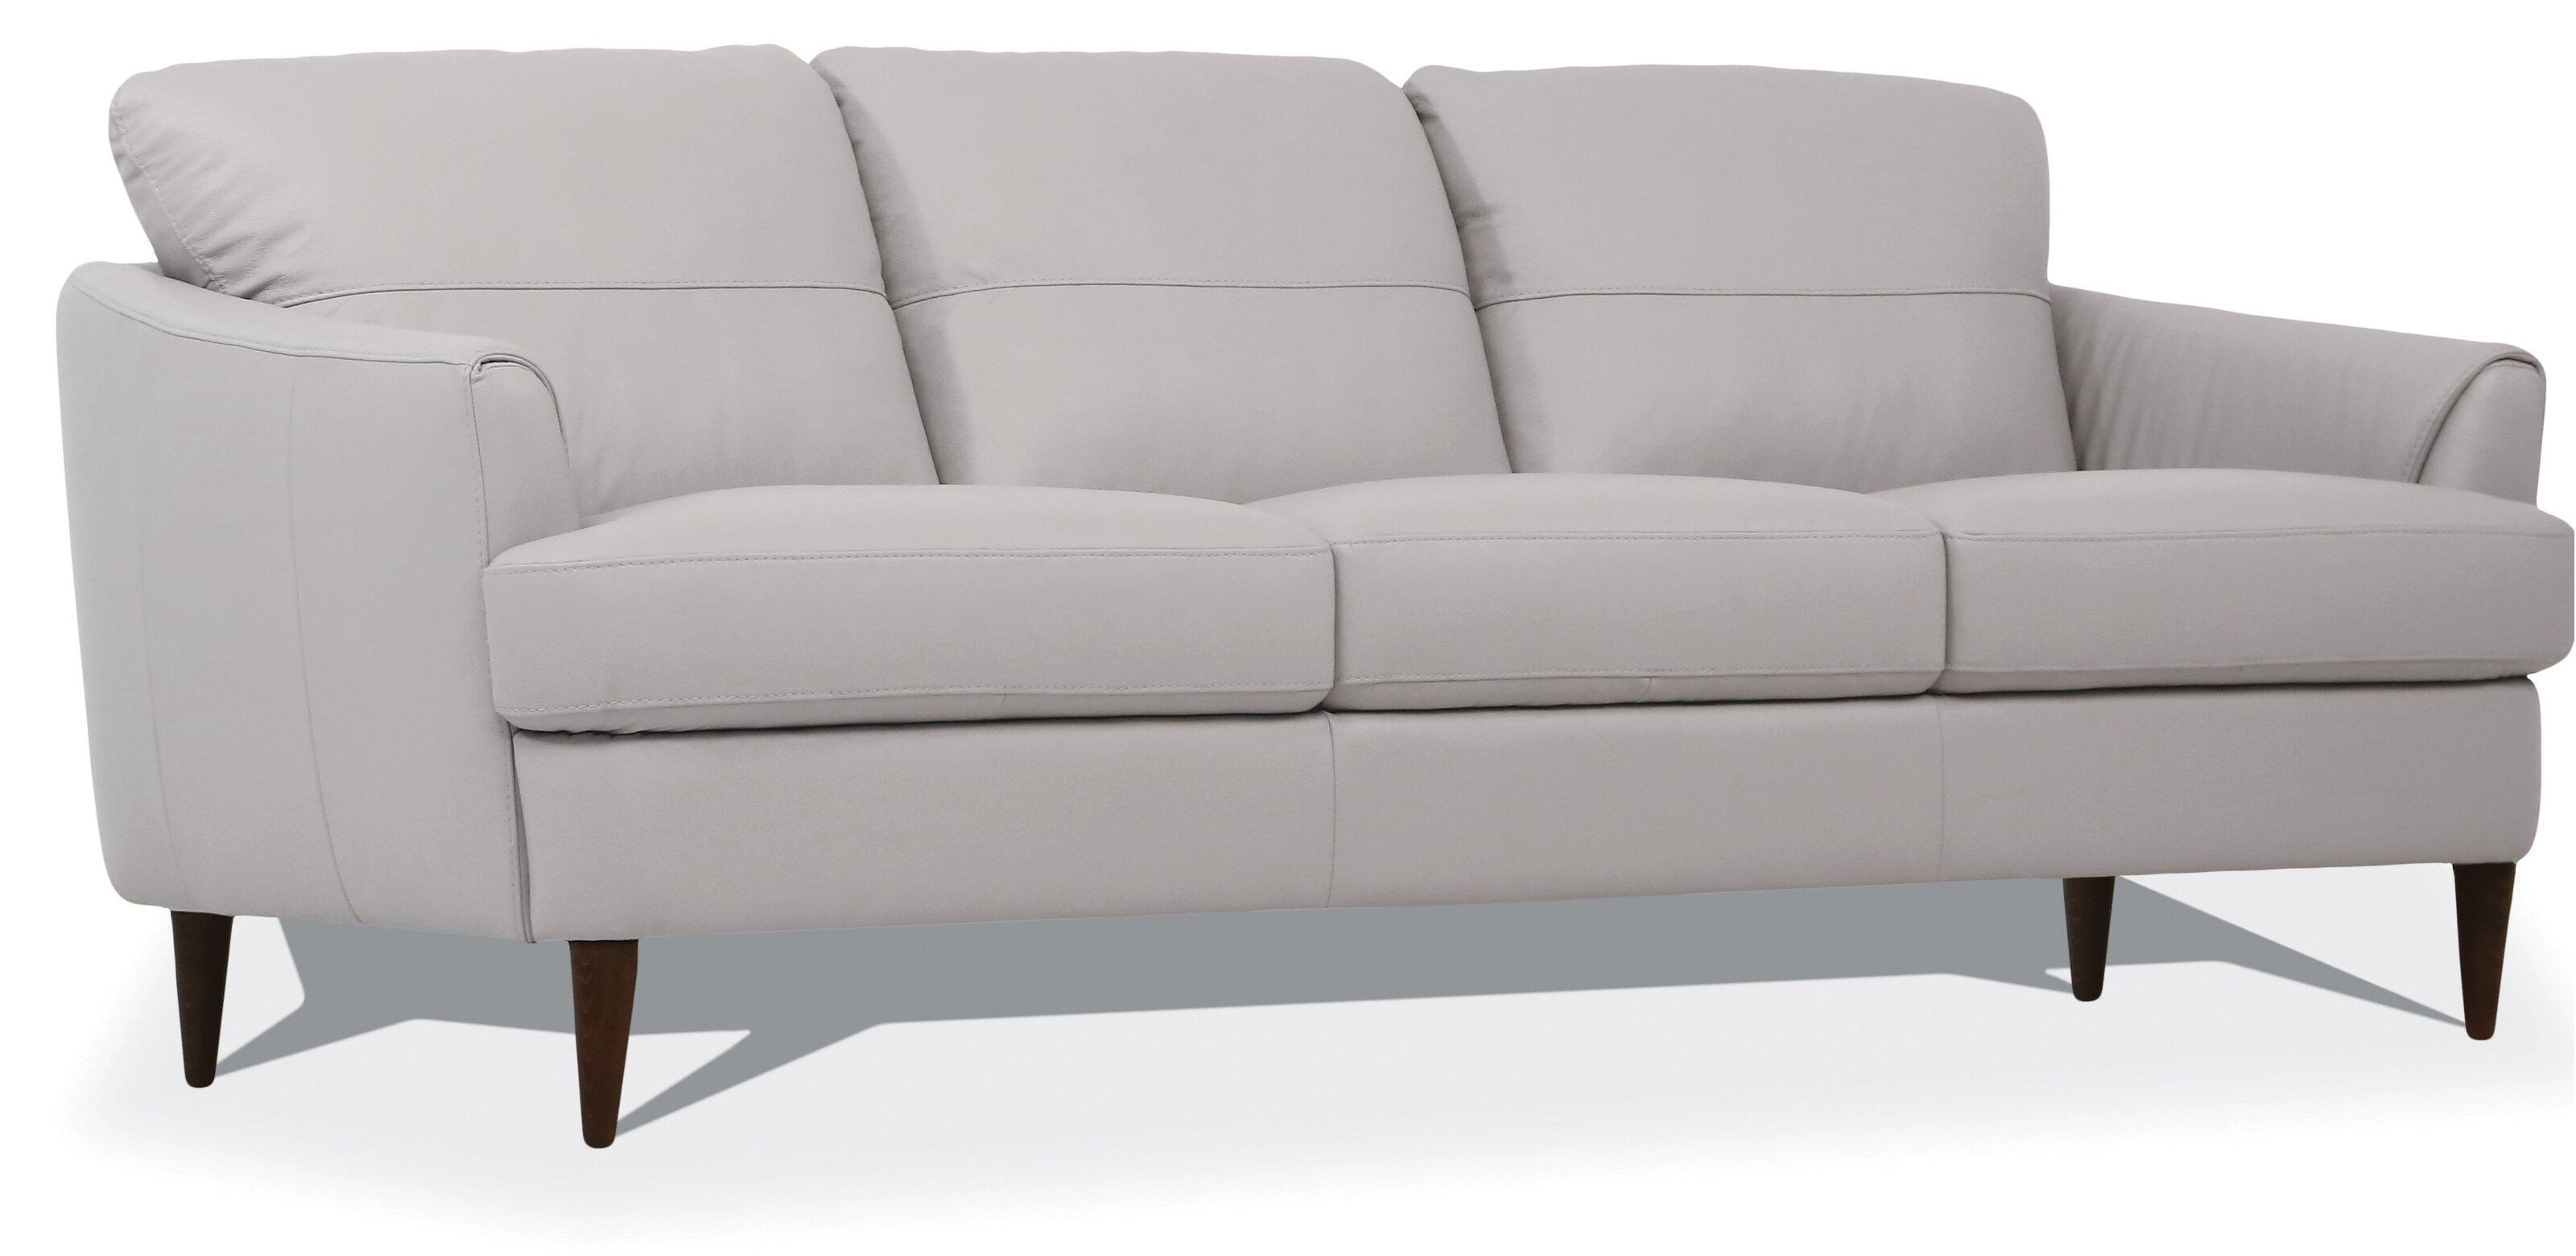 Contemporary Sofa Helena 54575 in Pearl Leather